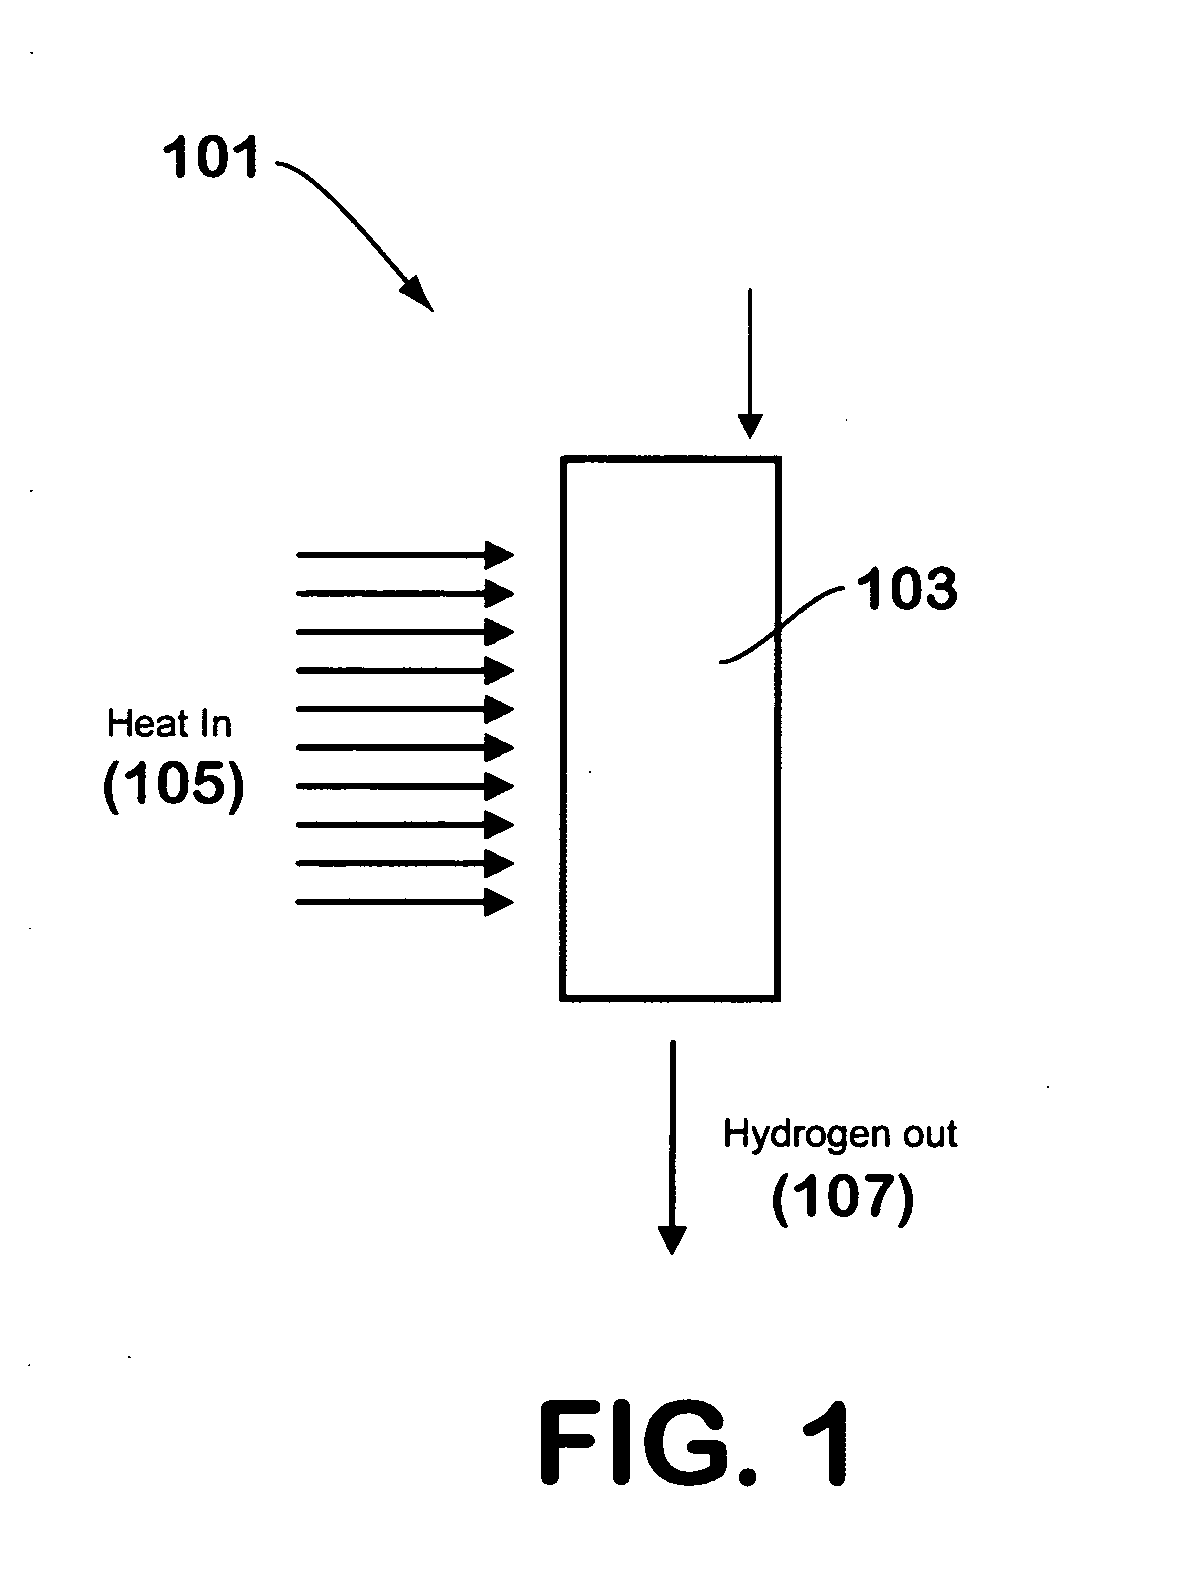 Hydrolysis of chemical hydrides utilizing hydrated compounds